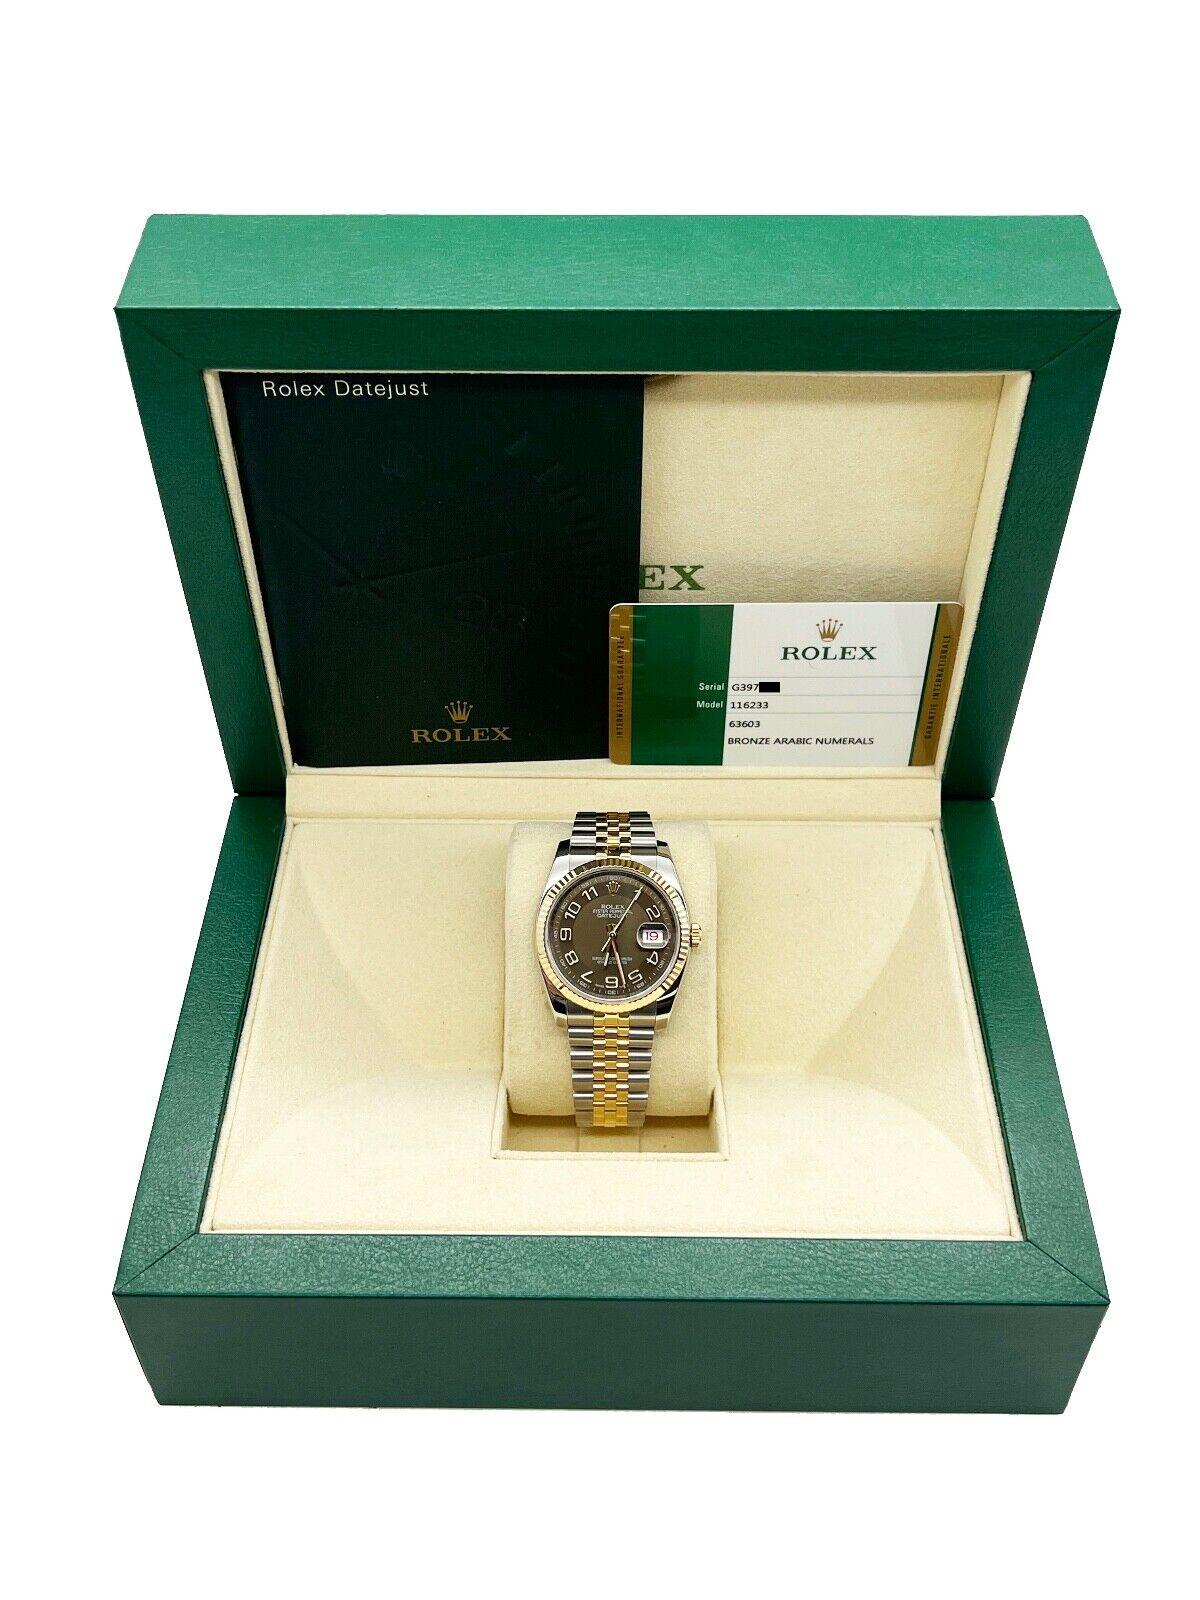 Rolex Datejust 116233 Bronze Arabic Dial 18K Gold Stainless Steel Box Paper In Excellent Condition For Sale In San Diego, CA